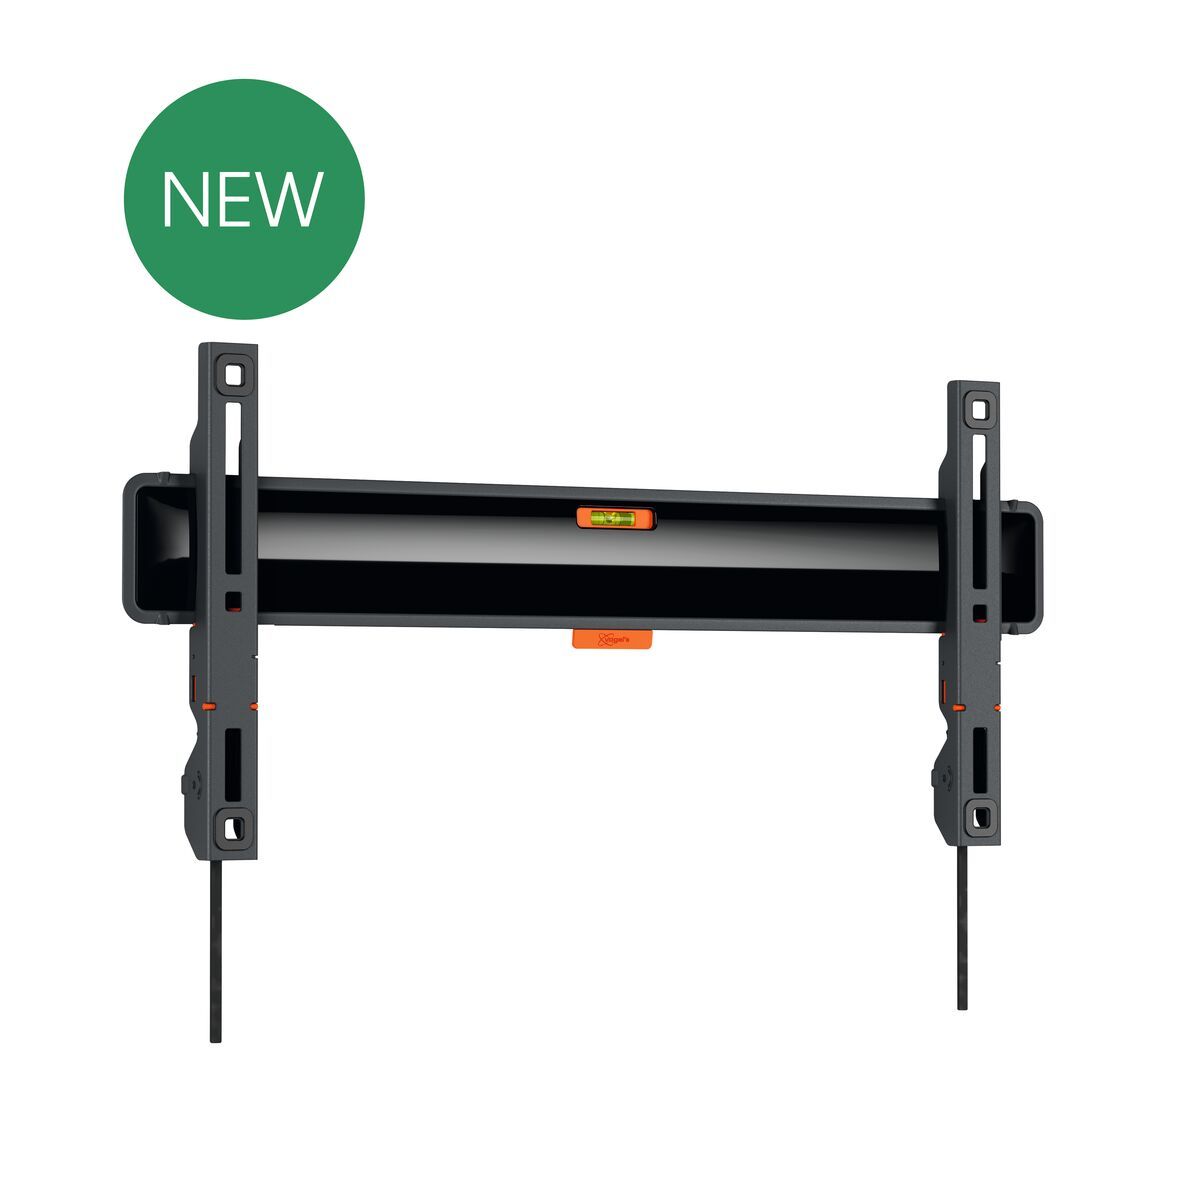 Vogel's TVM 3405 SP Fixed OLED TV Wall Mount - Suitable for 32 up to 77 inch TVs - Promo